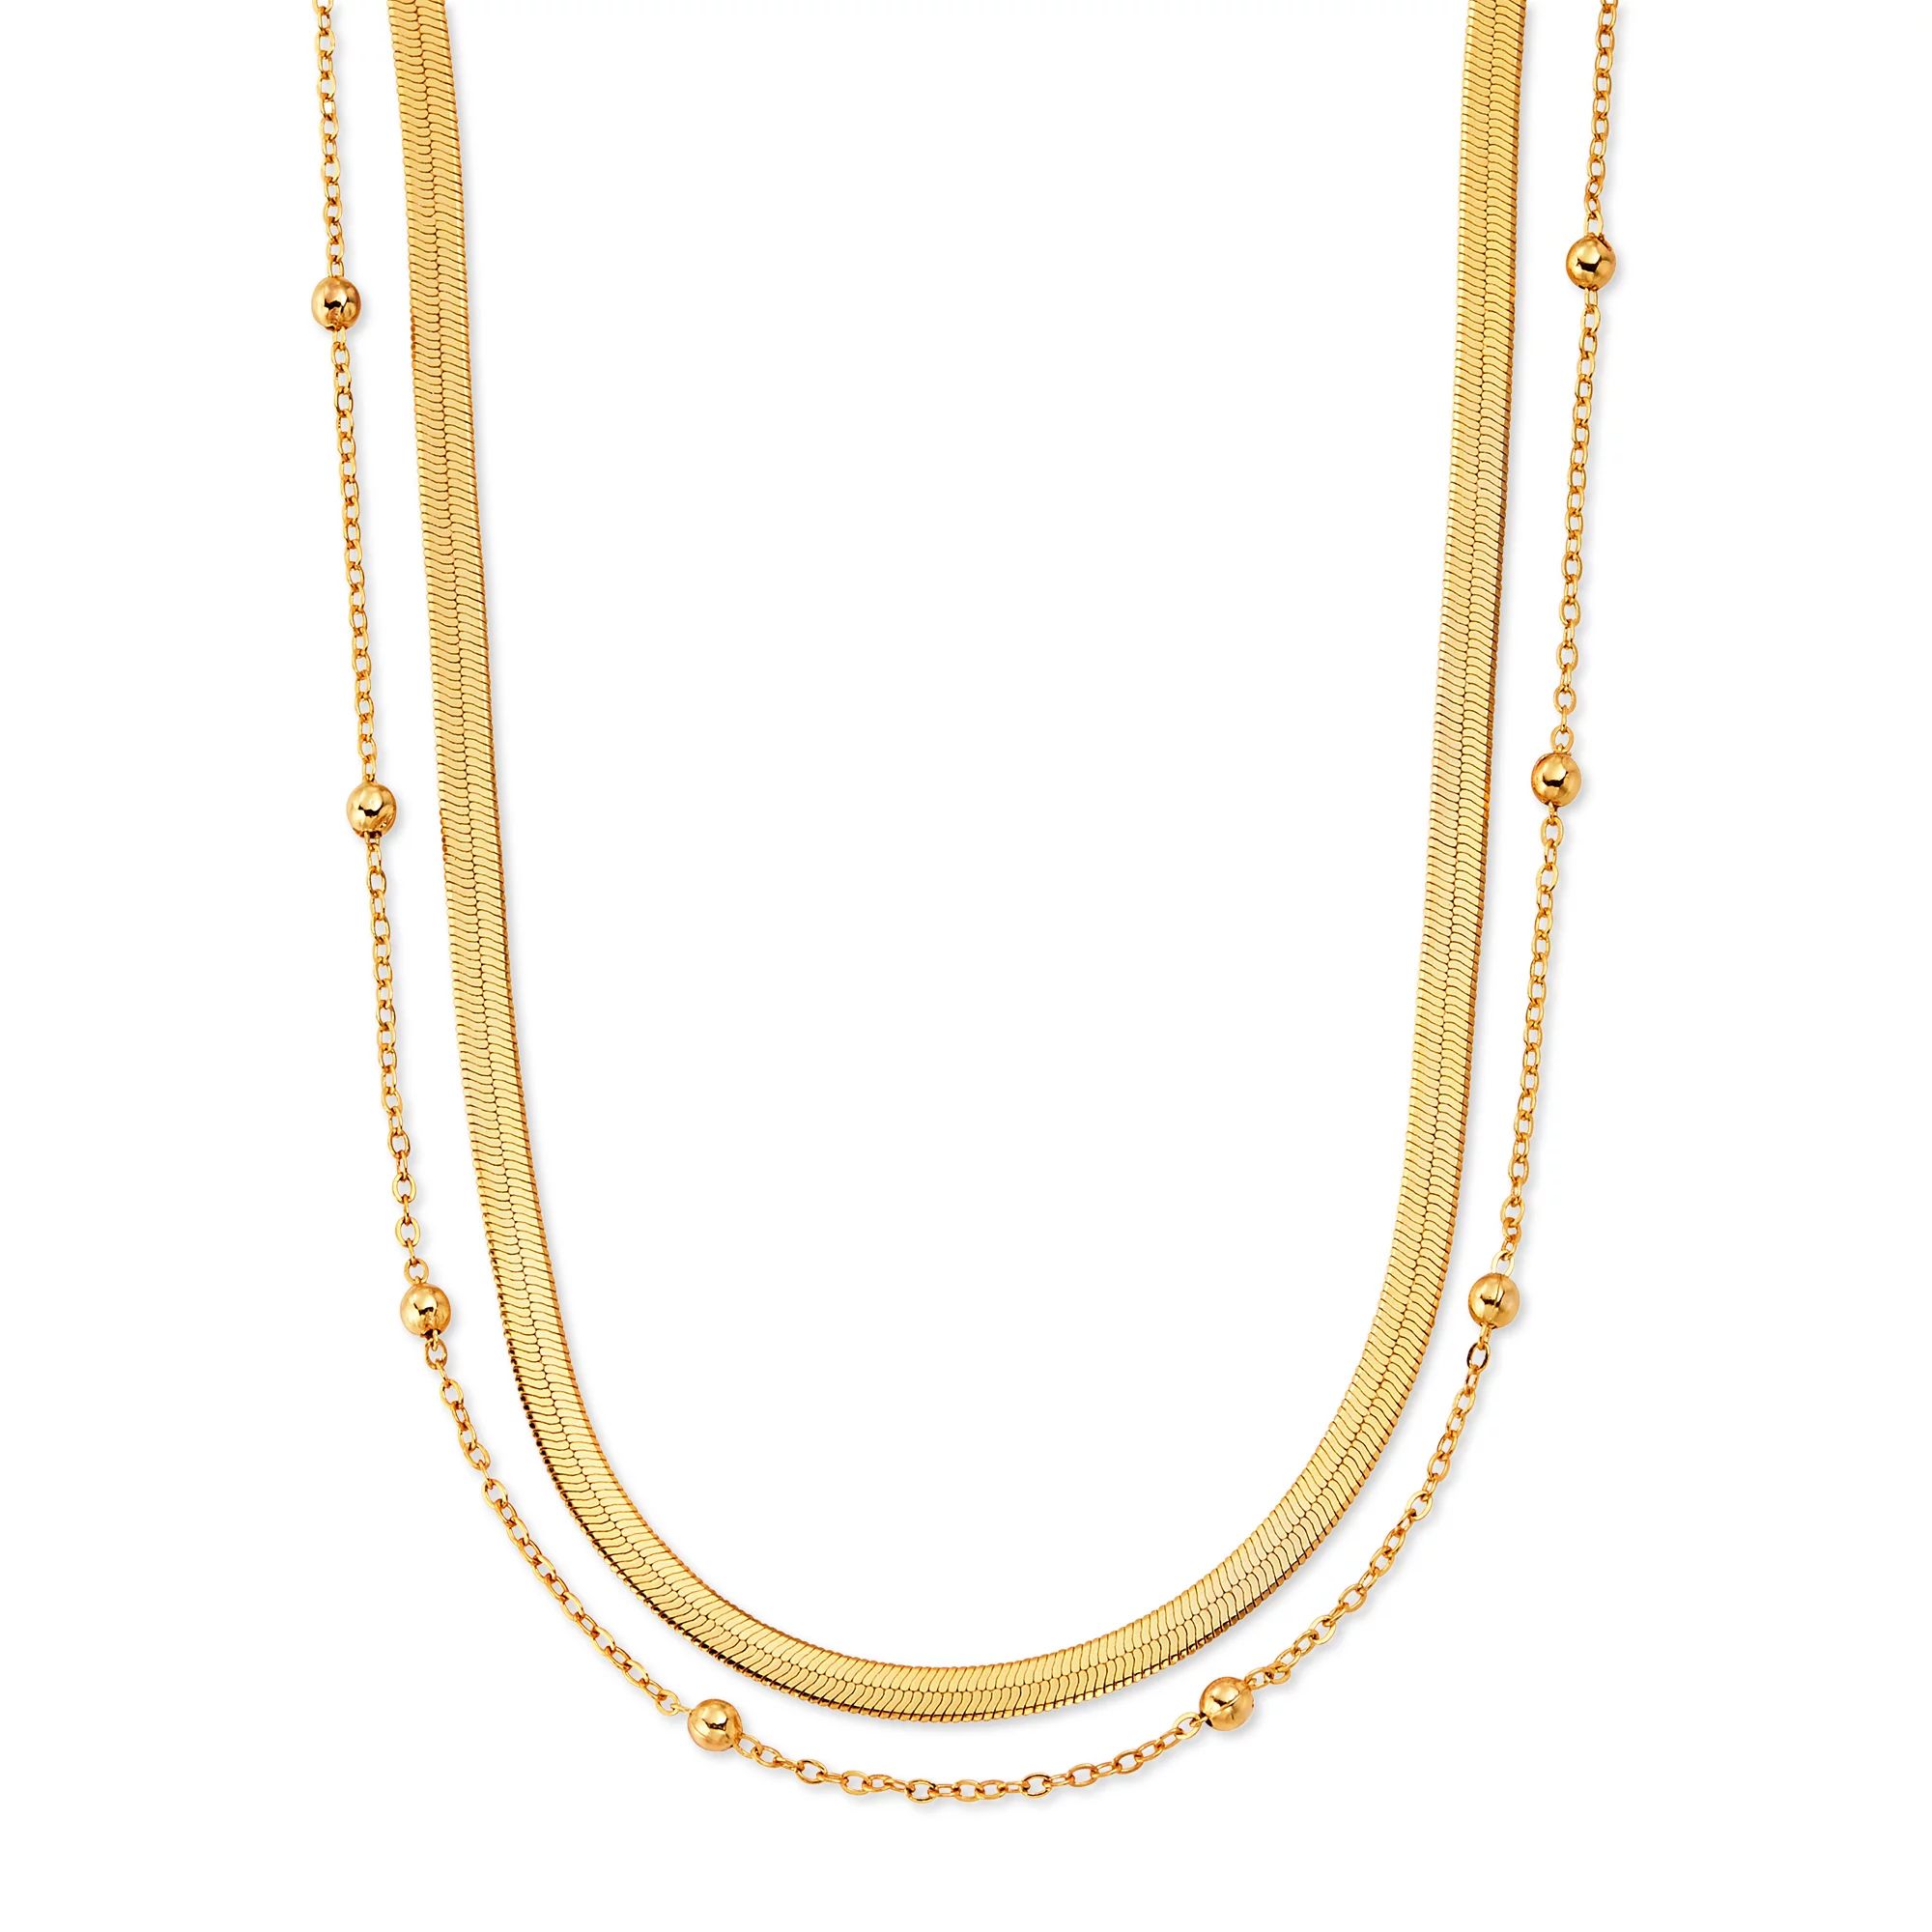 Scoop Brass Yellow Gold-Plated Double Layered Necklace, 15" + 3" Extender | Walmart (US)